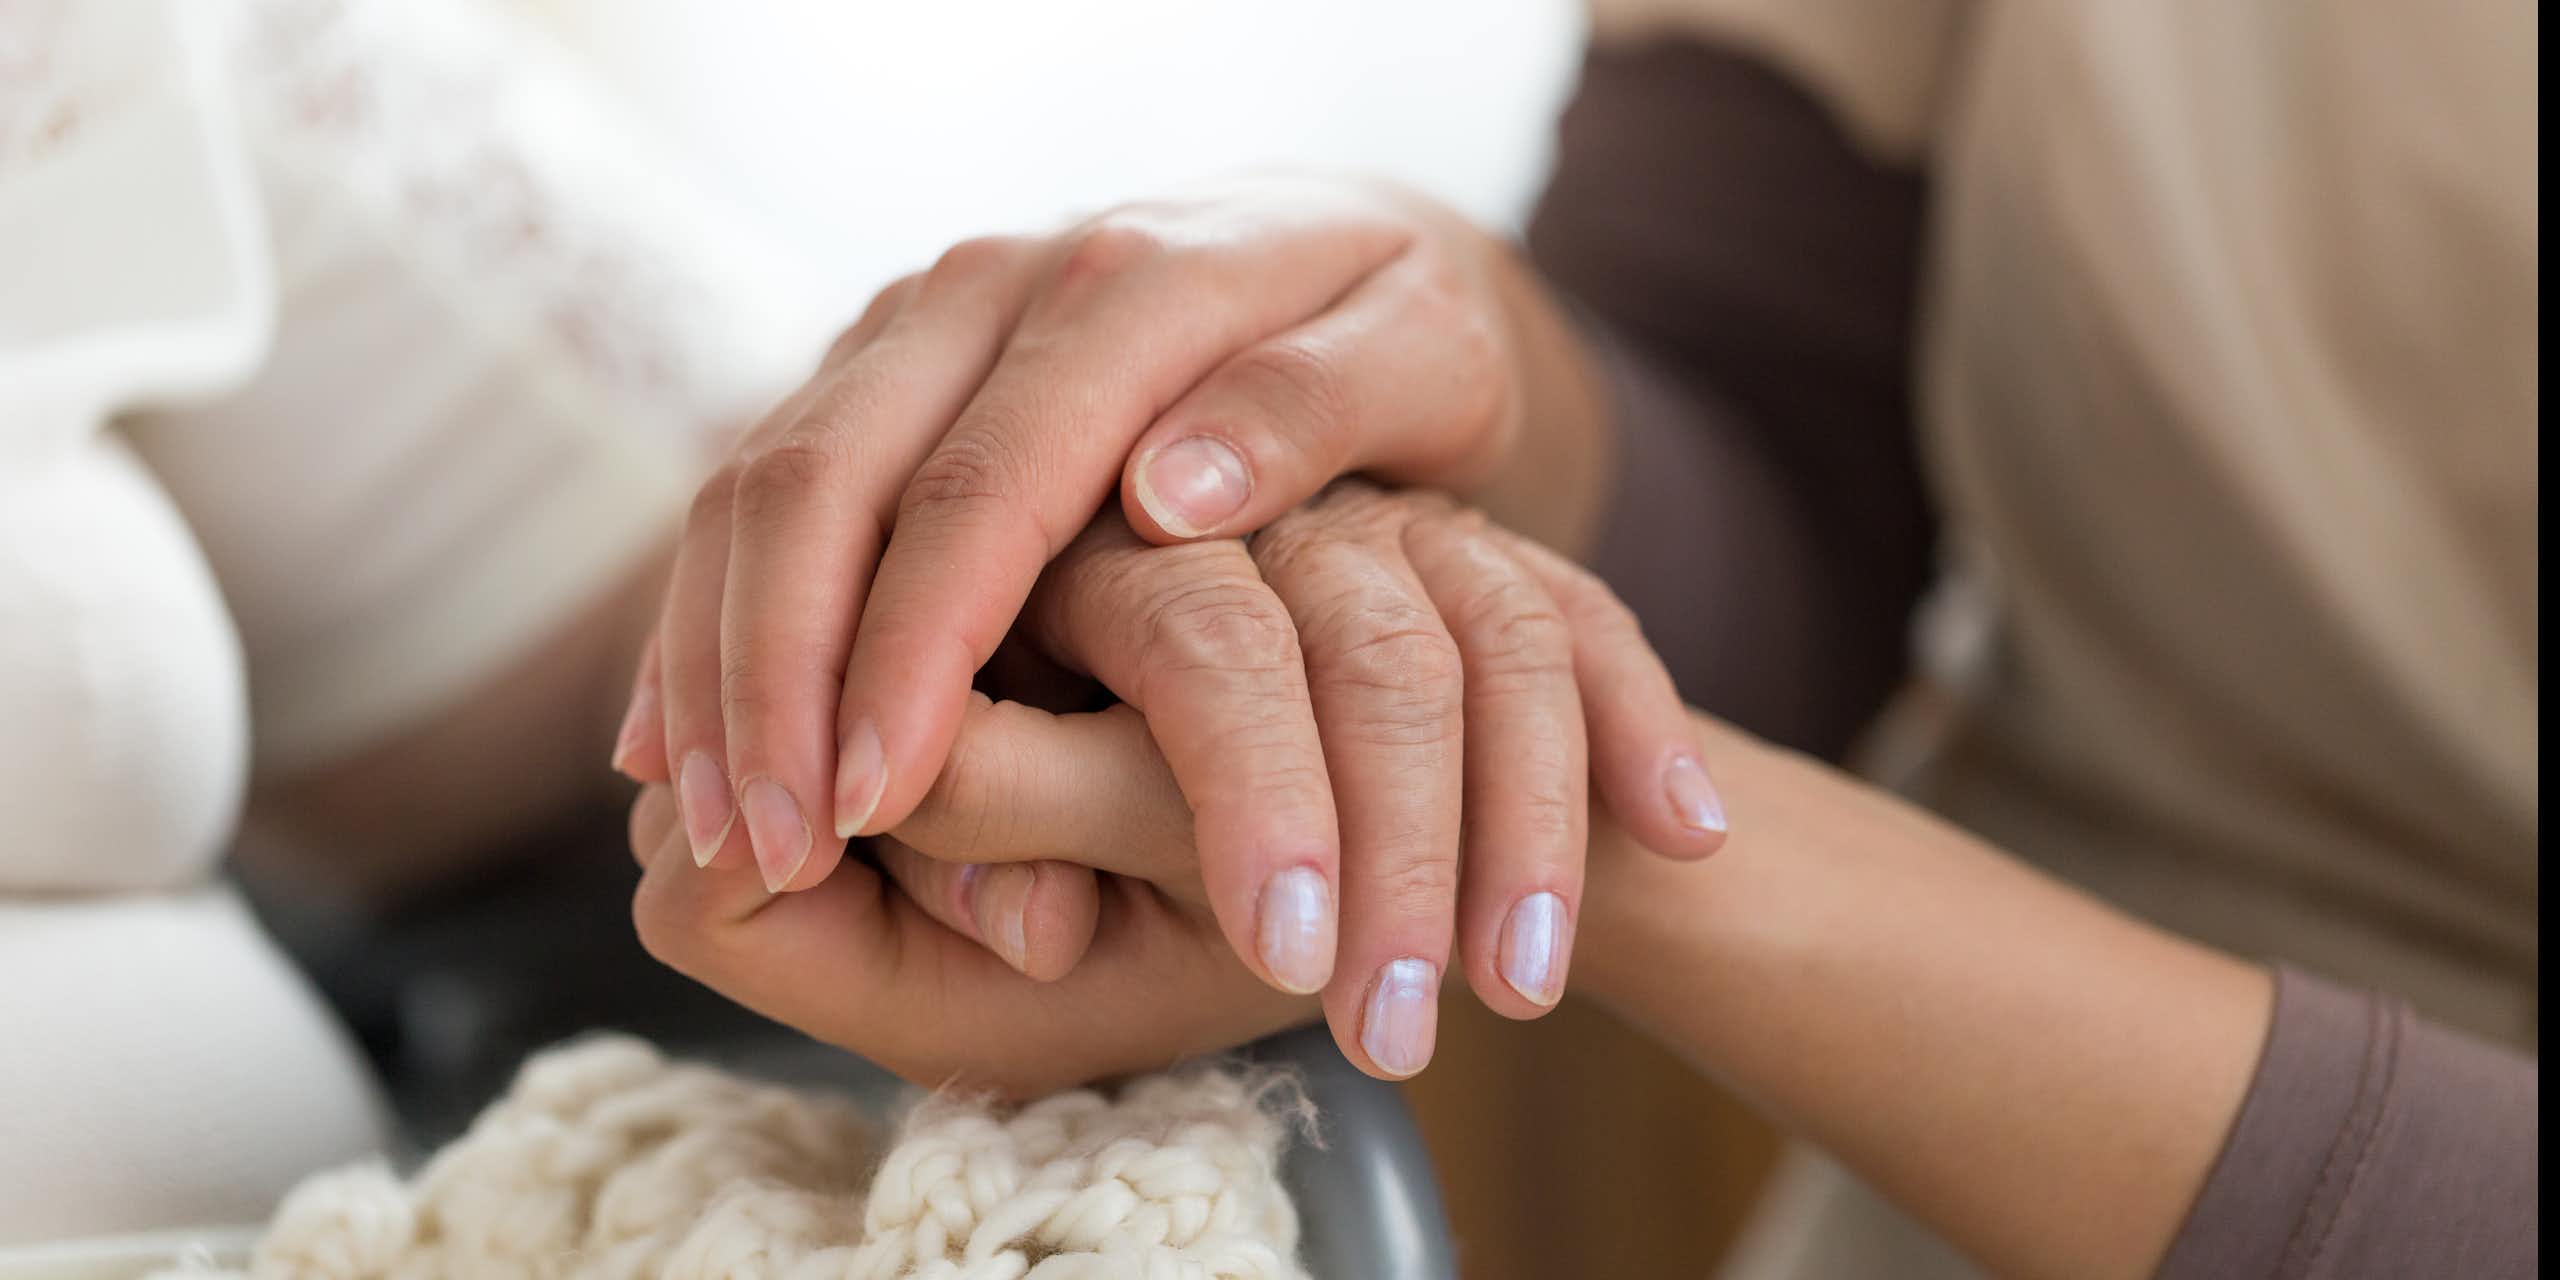 A close up of a young woman holding the hands of an older individual